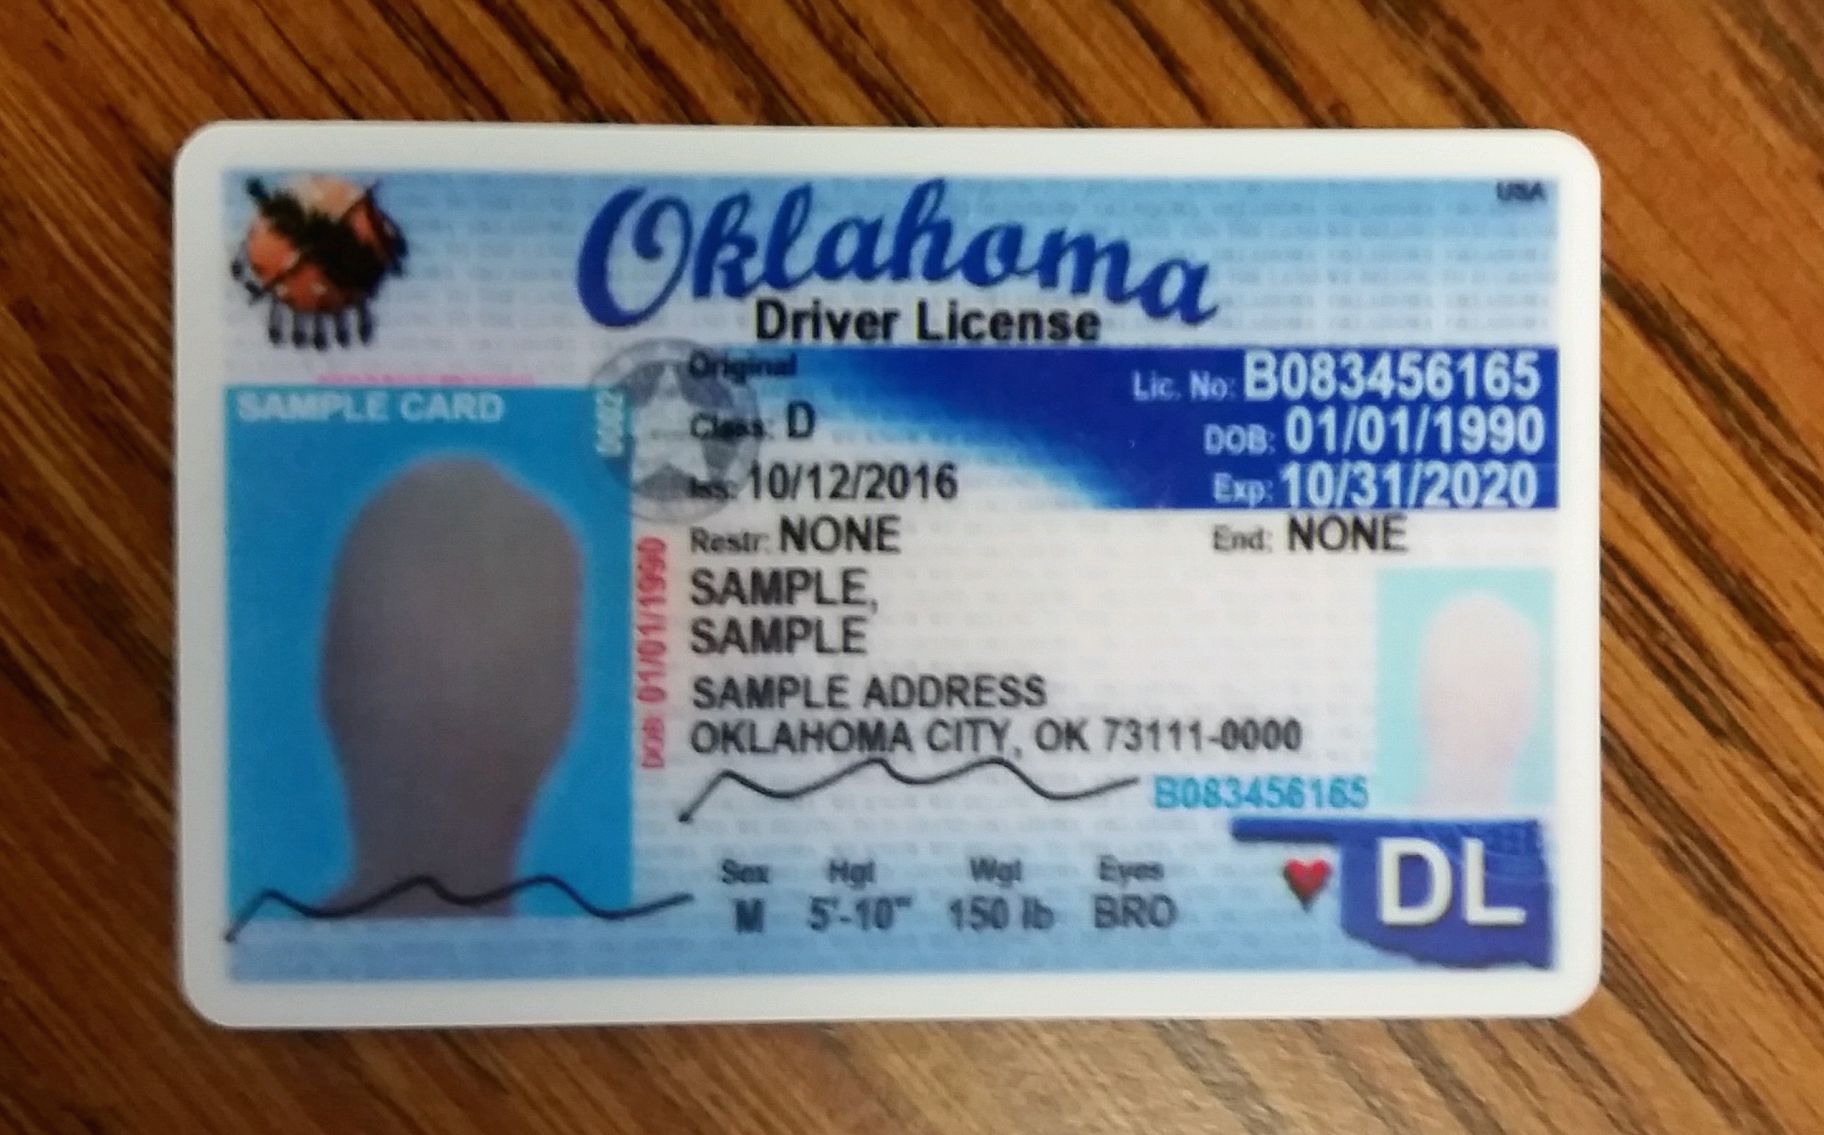 what makes you eligible for an oklahoma liquor license